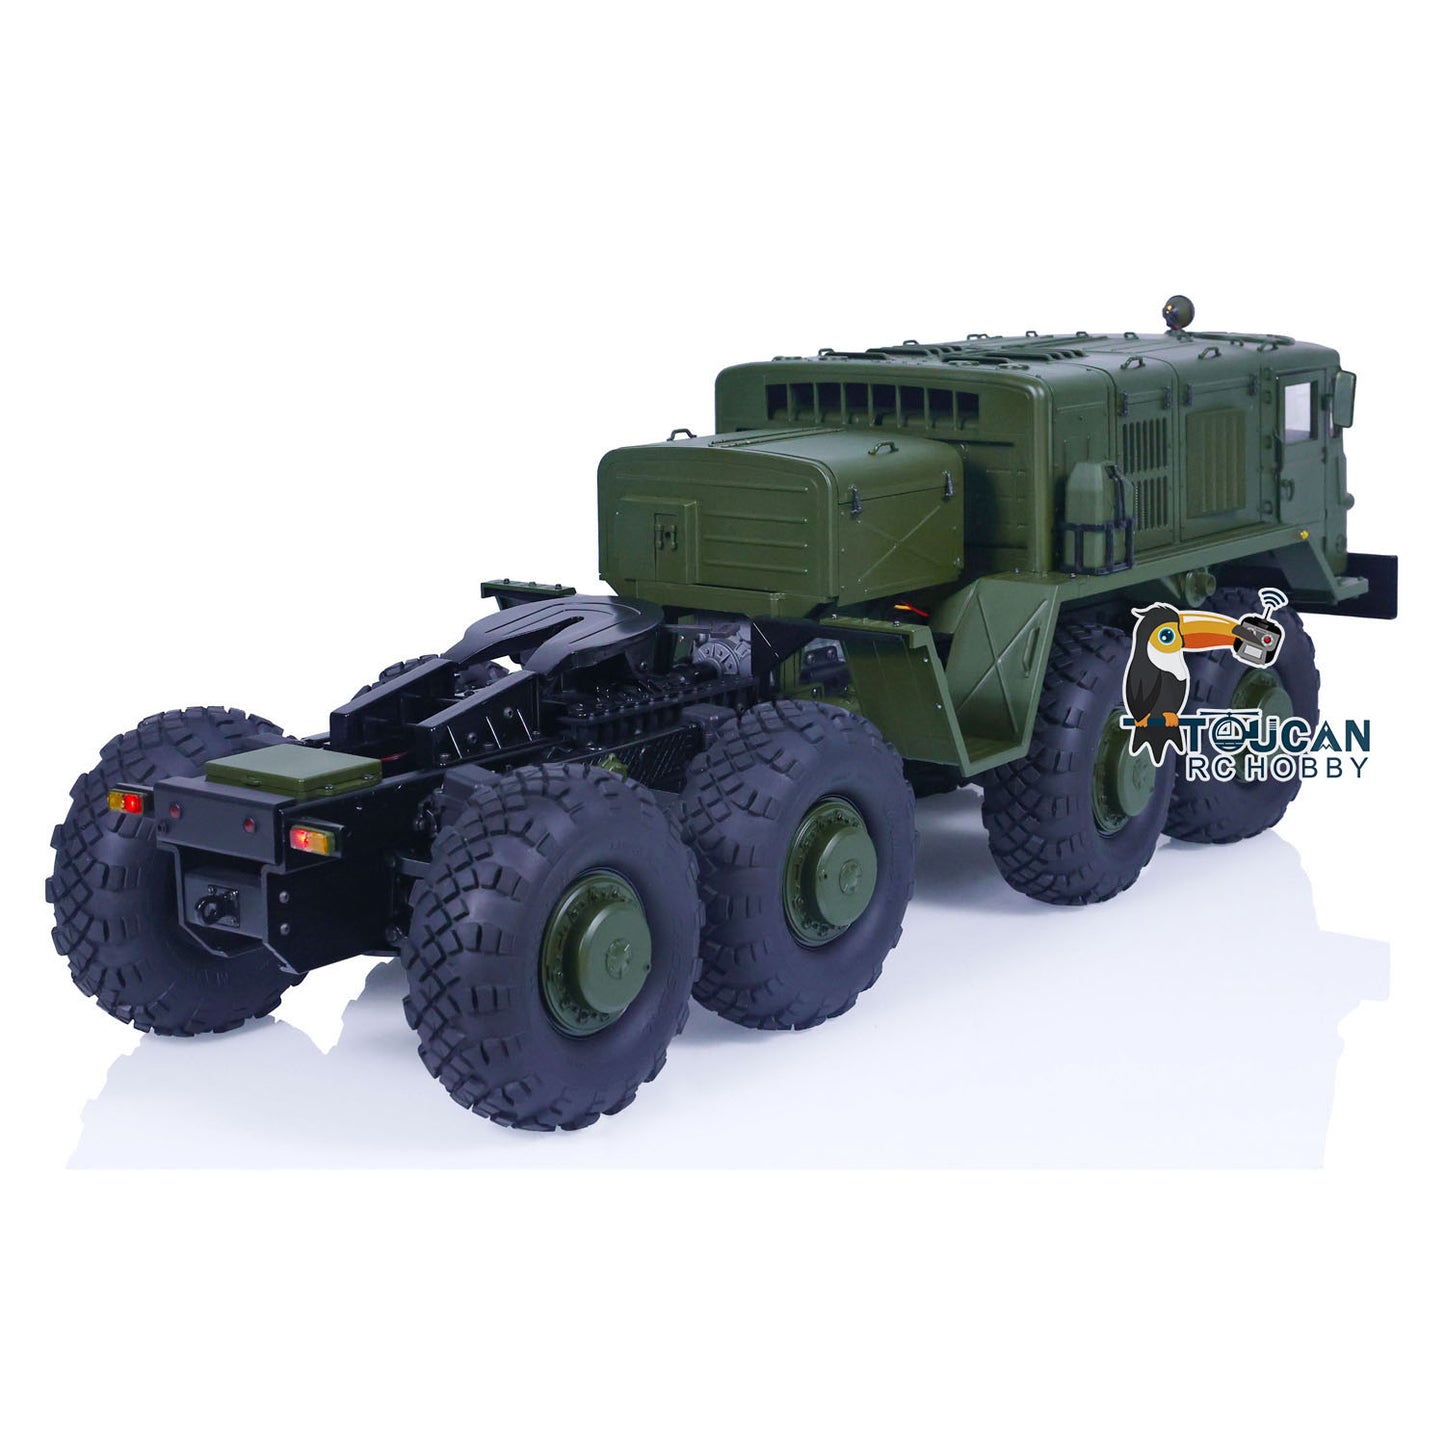 CROSSRC 1/12 8x8 BC8 Military RC Climbing Vehicle Tractor Truck Ready To Run Remote Controlled Crawler Car Hobby Model